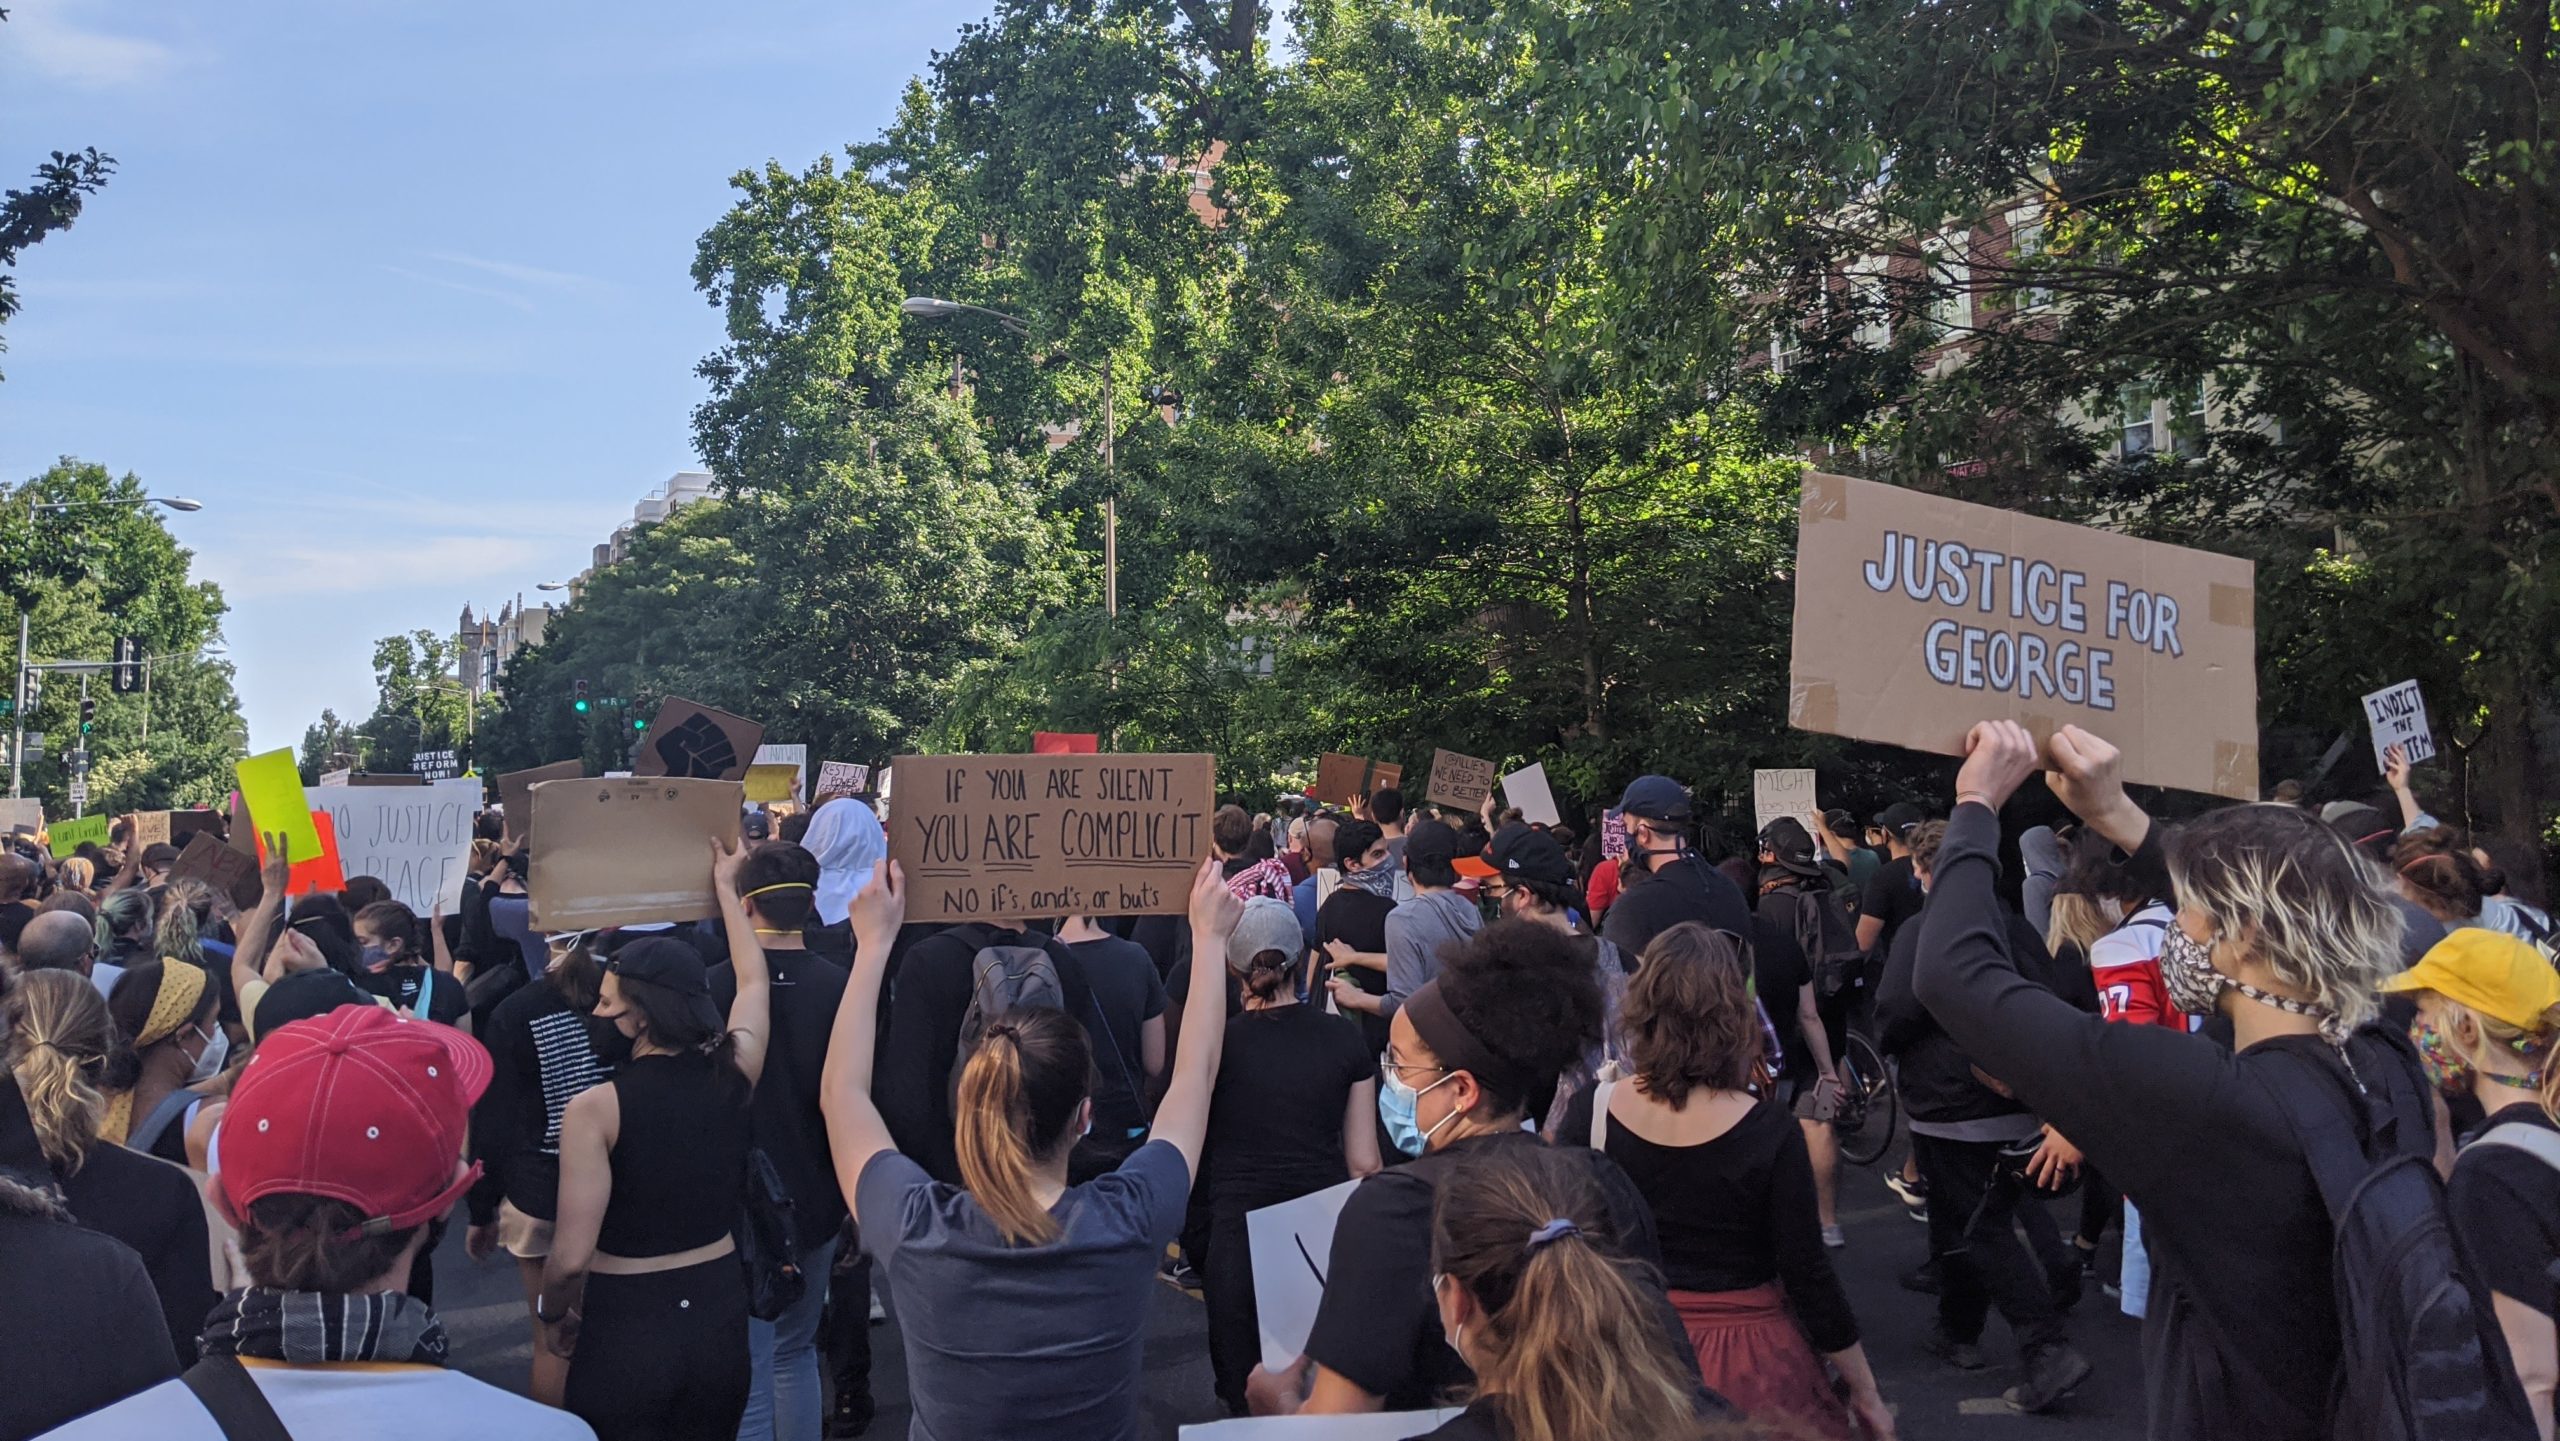 Protesters on the march in D.C. on June 2. (Photo: Tom McKay, Gizmodo)